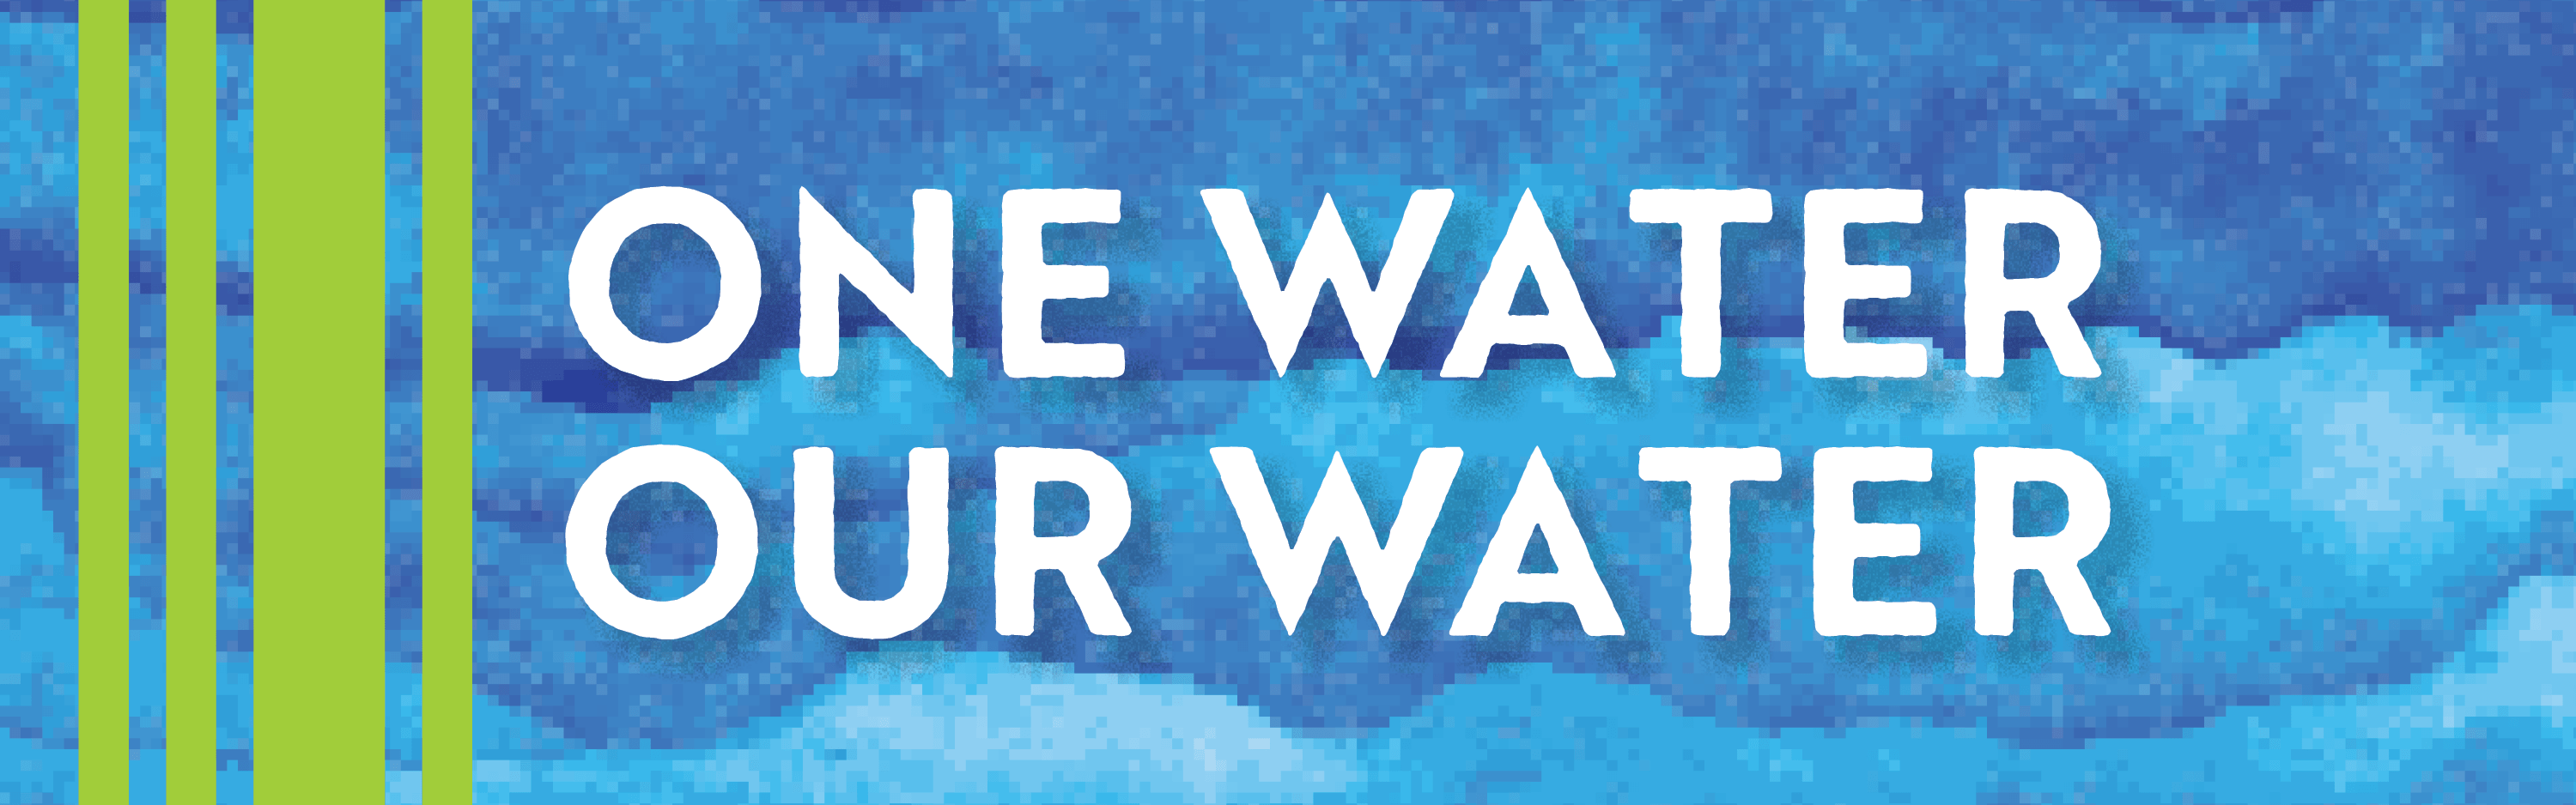 One Water Our Water logo